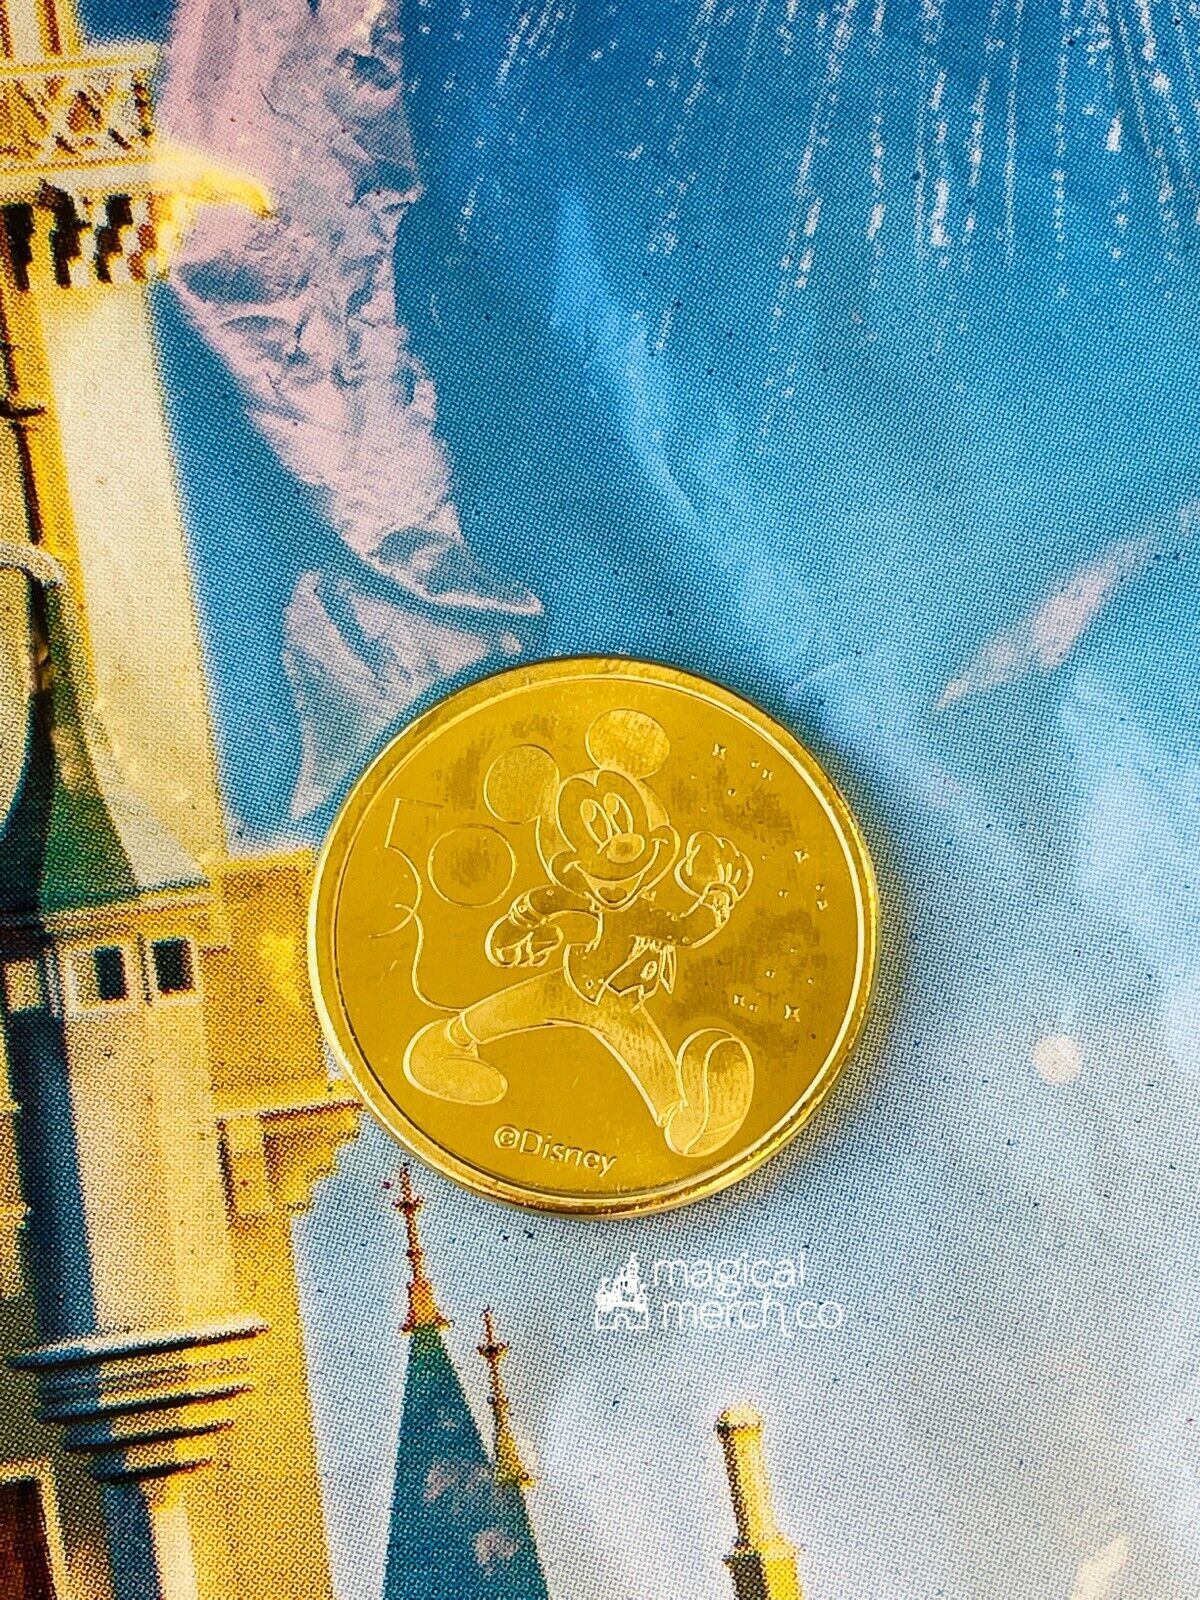 MICKEY MOUSE Walt Disney World 50th Anniversary Gold Metal Medallion Coin